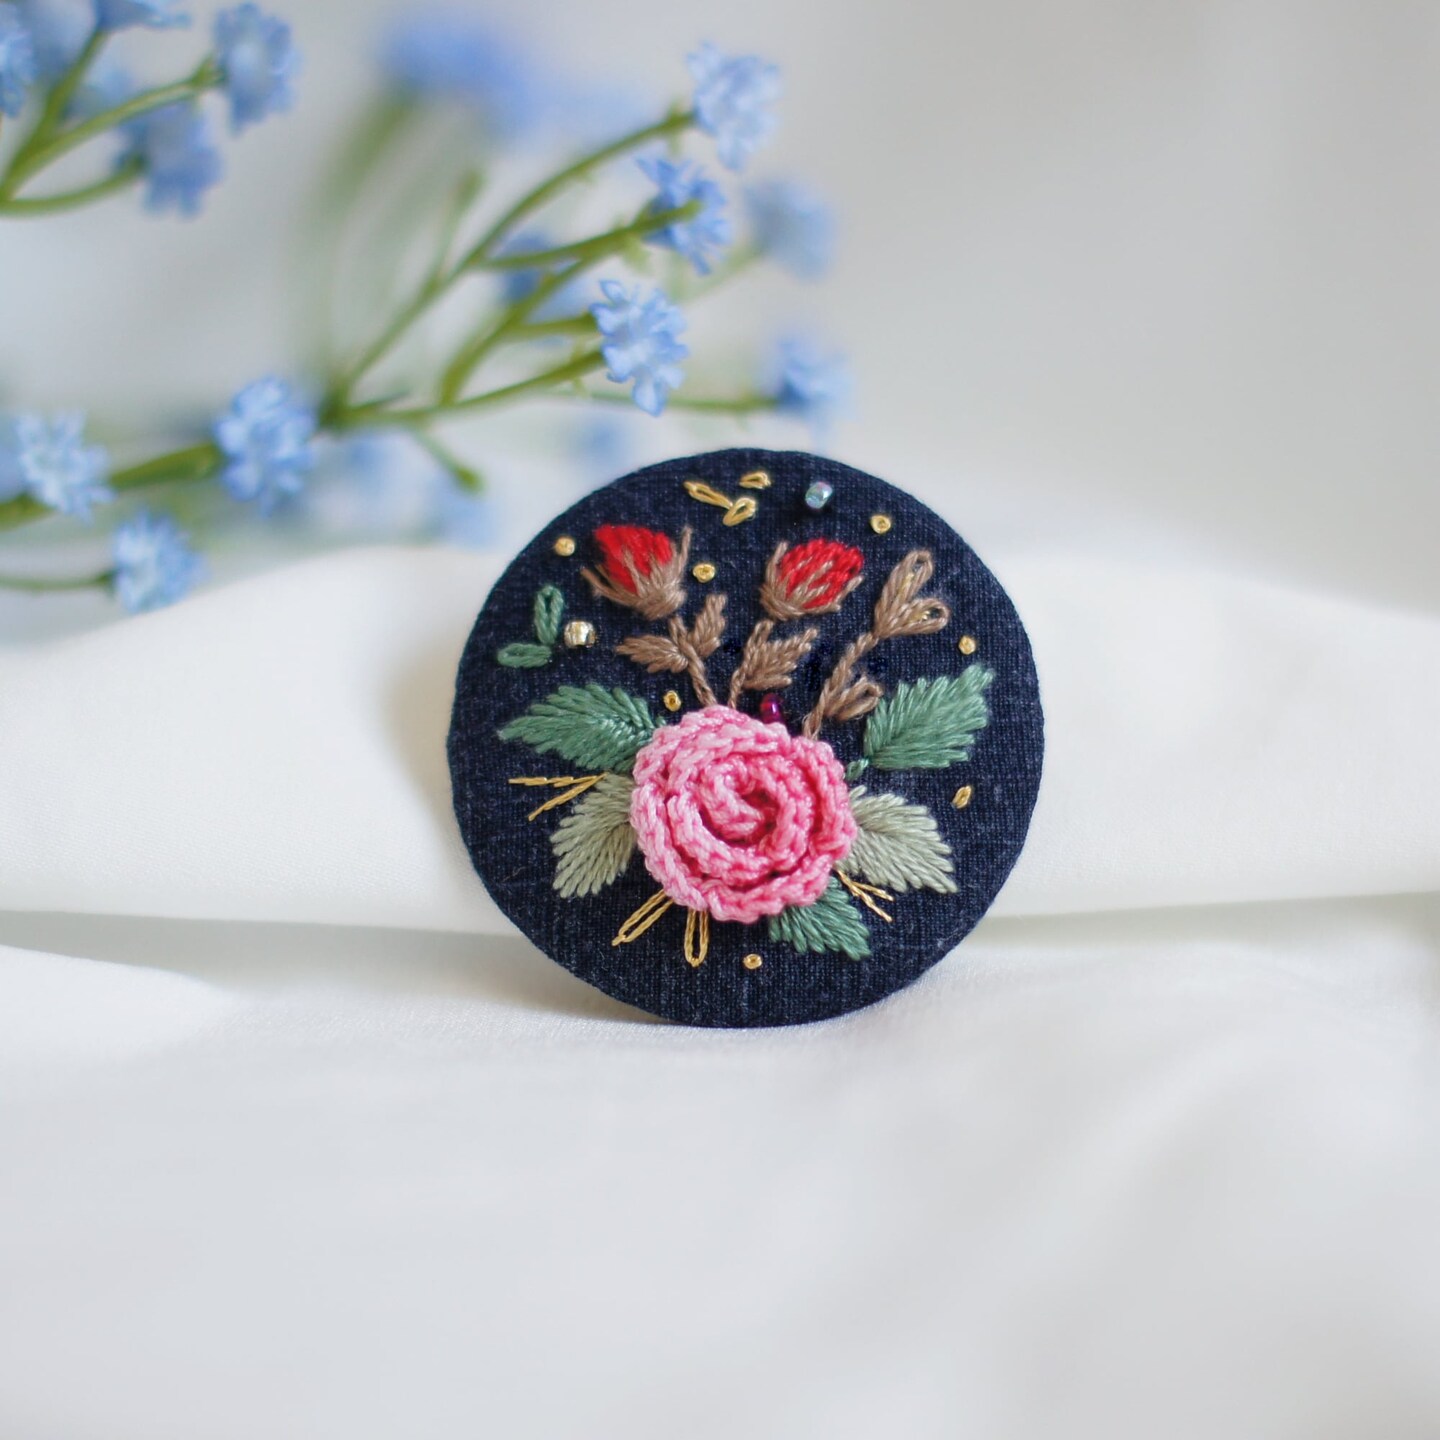 Handcrafted Rose Brooch Pins - Unique and Delicate Floral Jewelry